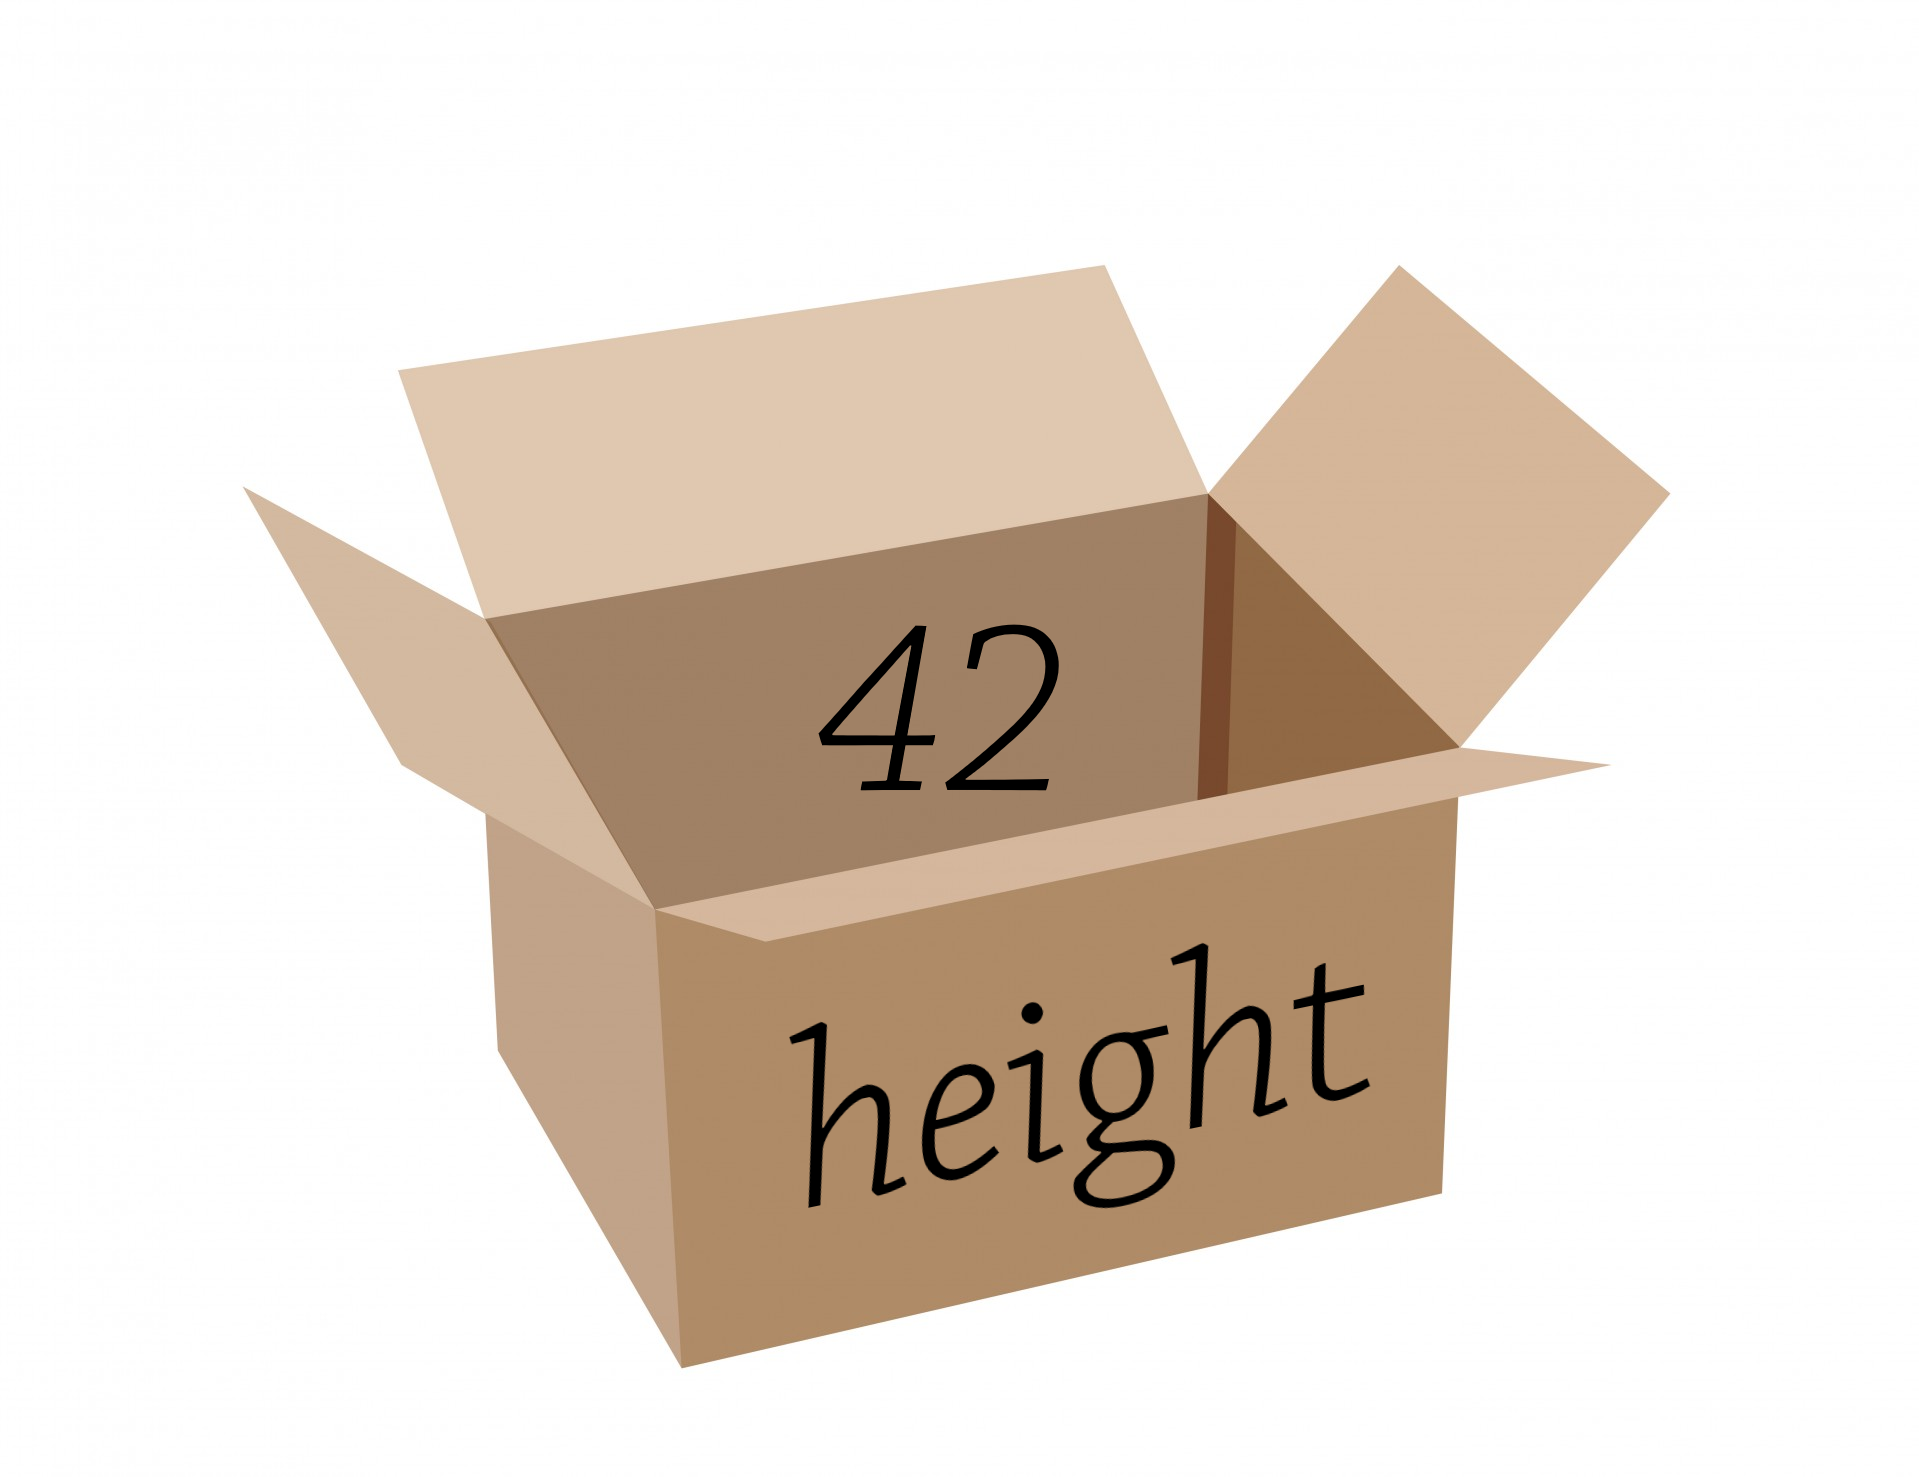 Cardboard Box Labelled Height